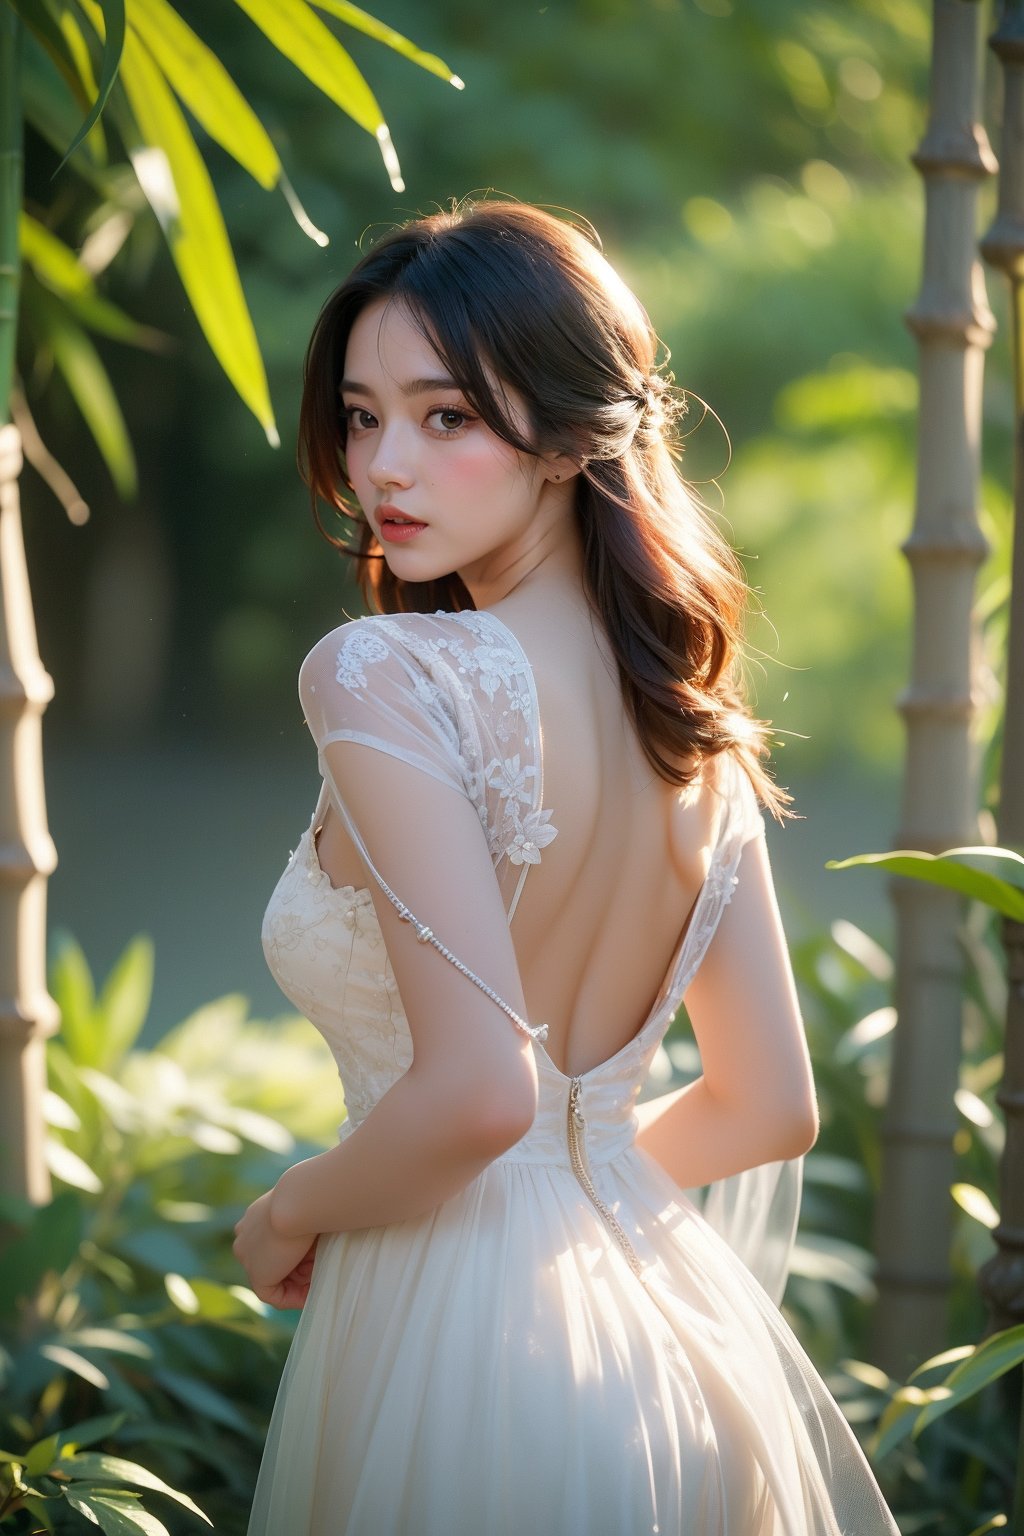 This photo, likely taken by a contemporary artist, shows a woman wearing an exquisite backless white tulle dress.  The composition is very balanced, with the woman positioned slightly off center.  She gazes back with a smile, bathed in the natural light filtering through the towering bamboo forest.  The background is a dense bamboo forest, creating a tranquil and mysterious atmosphere.  Sunlight passes through the leaves, casting dreamlike beams of light that highlight the quiet atmosphere and the texture of the plants.  The overall scene evokes a sense of calm and connection with nature.